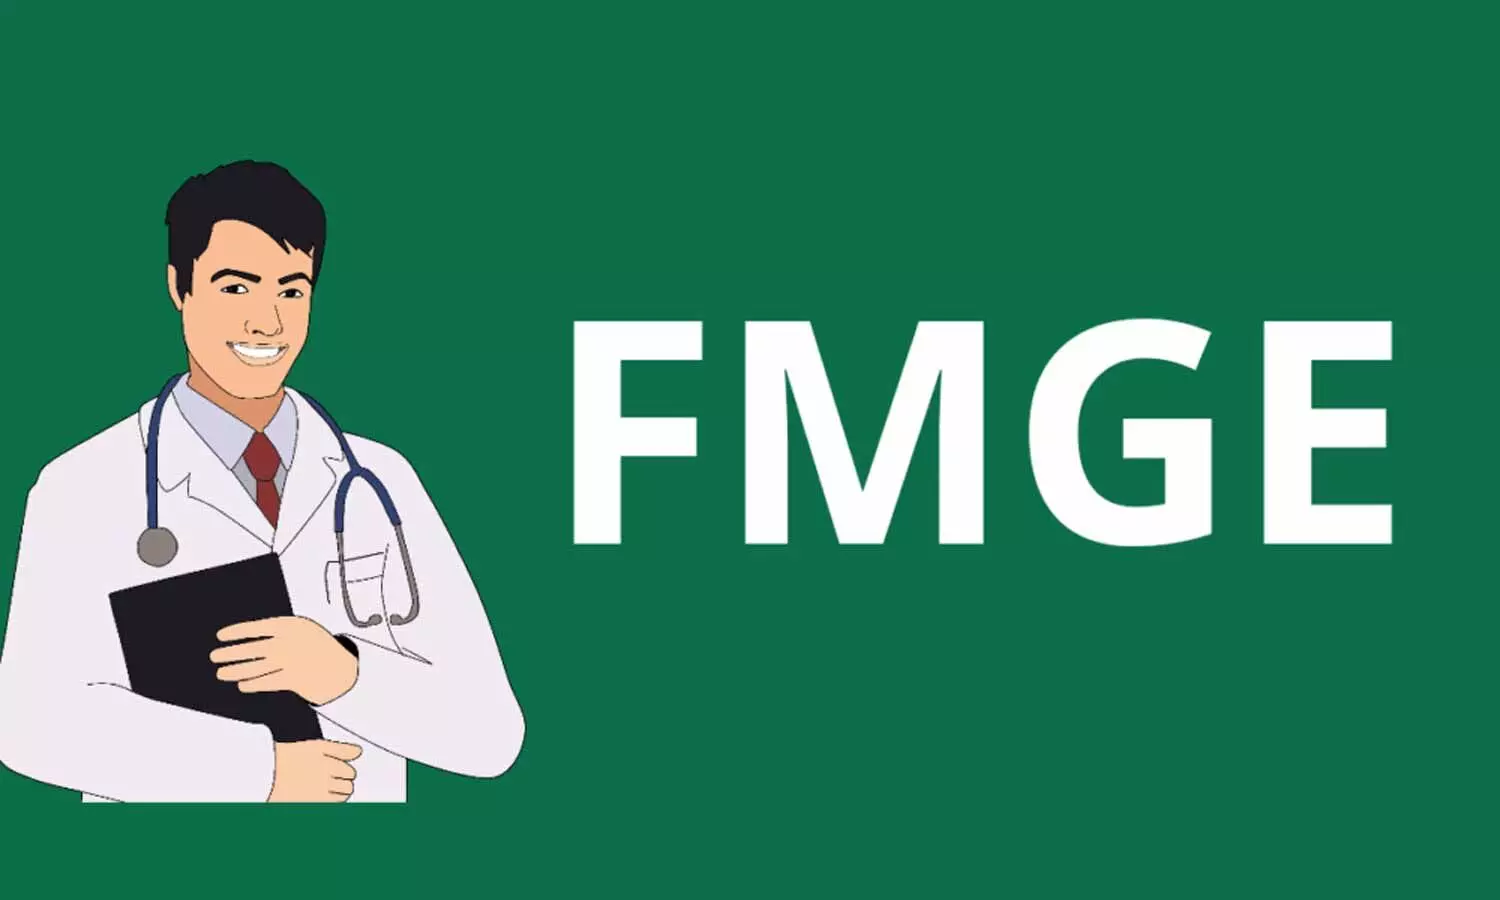 Demand for Percentile based evaluation of FMGE gains momentum